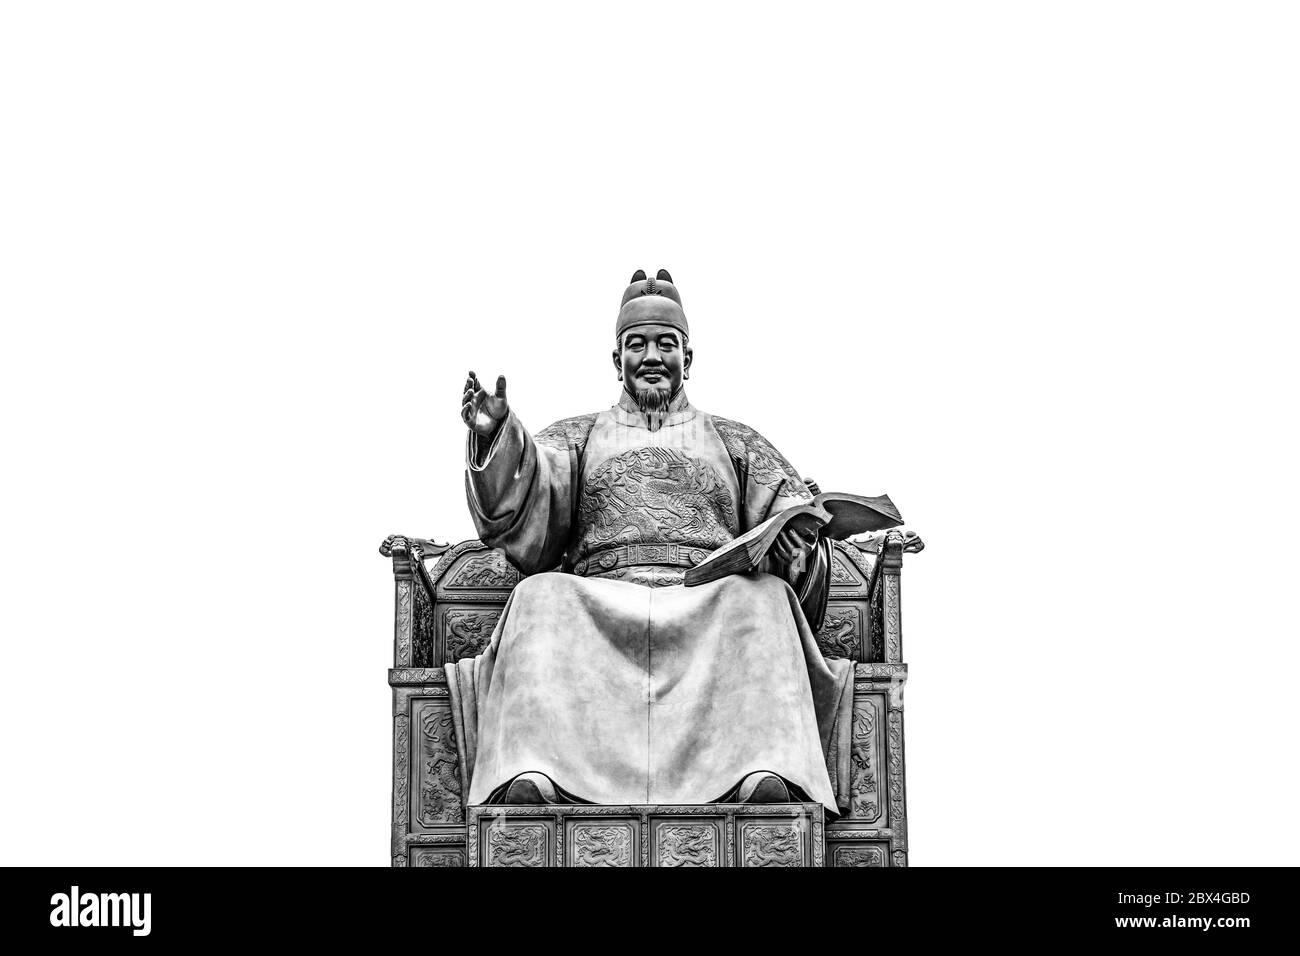 King Sejong statue from Gwanghwamun Square, isolated Stock Photo